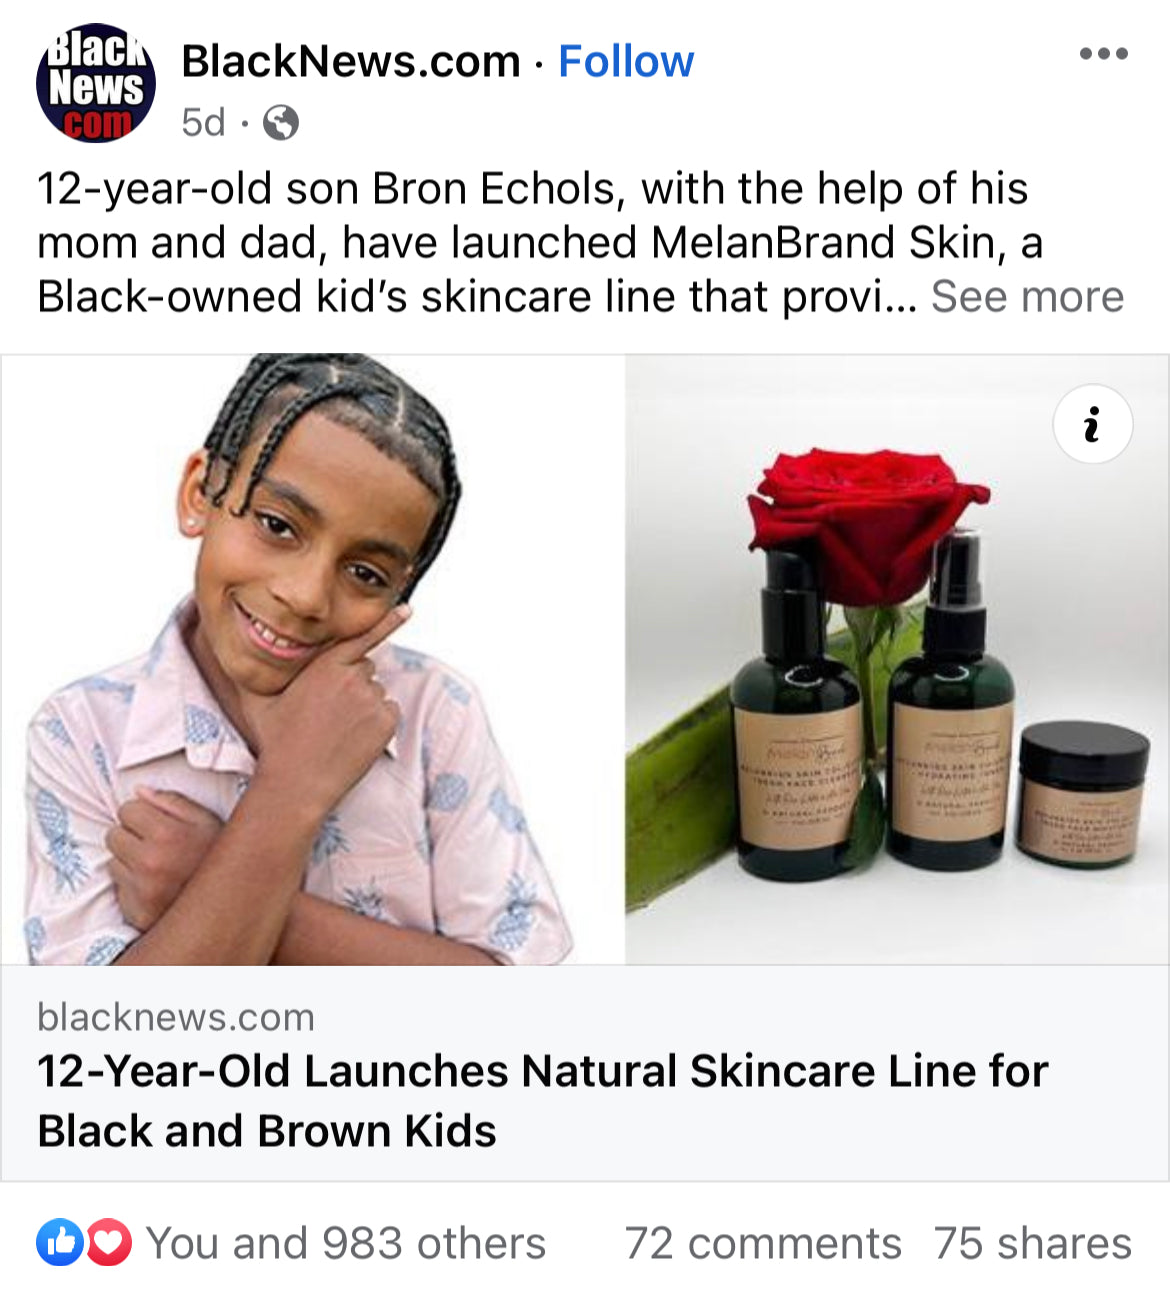 Melanbrand Skin Premium Products For Black And Brown Kids